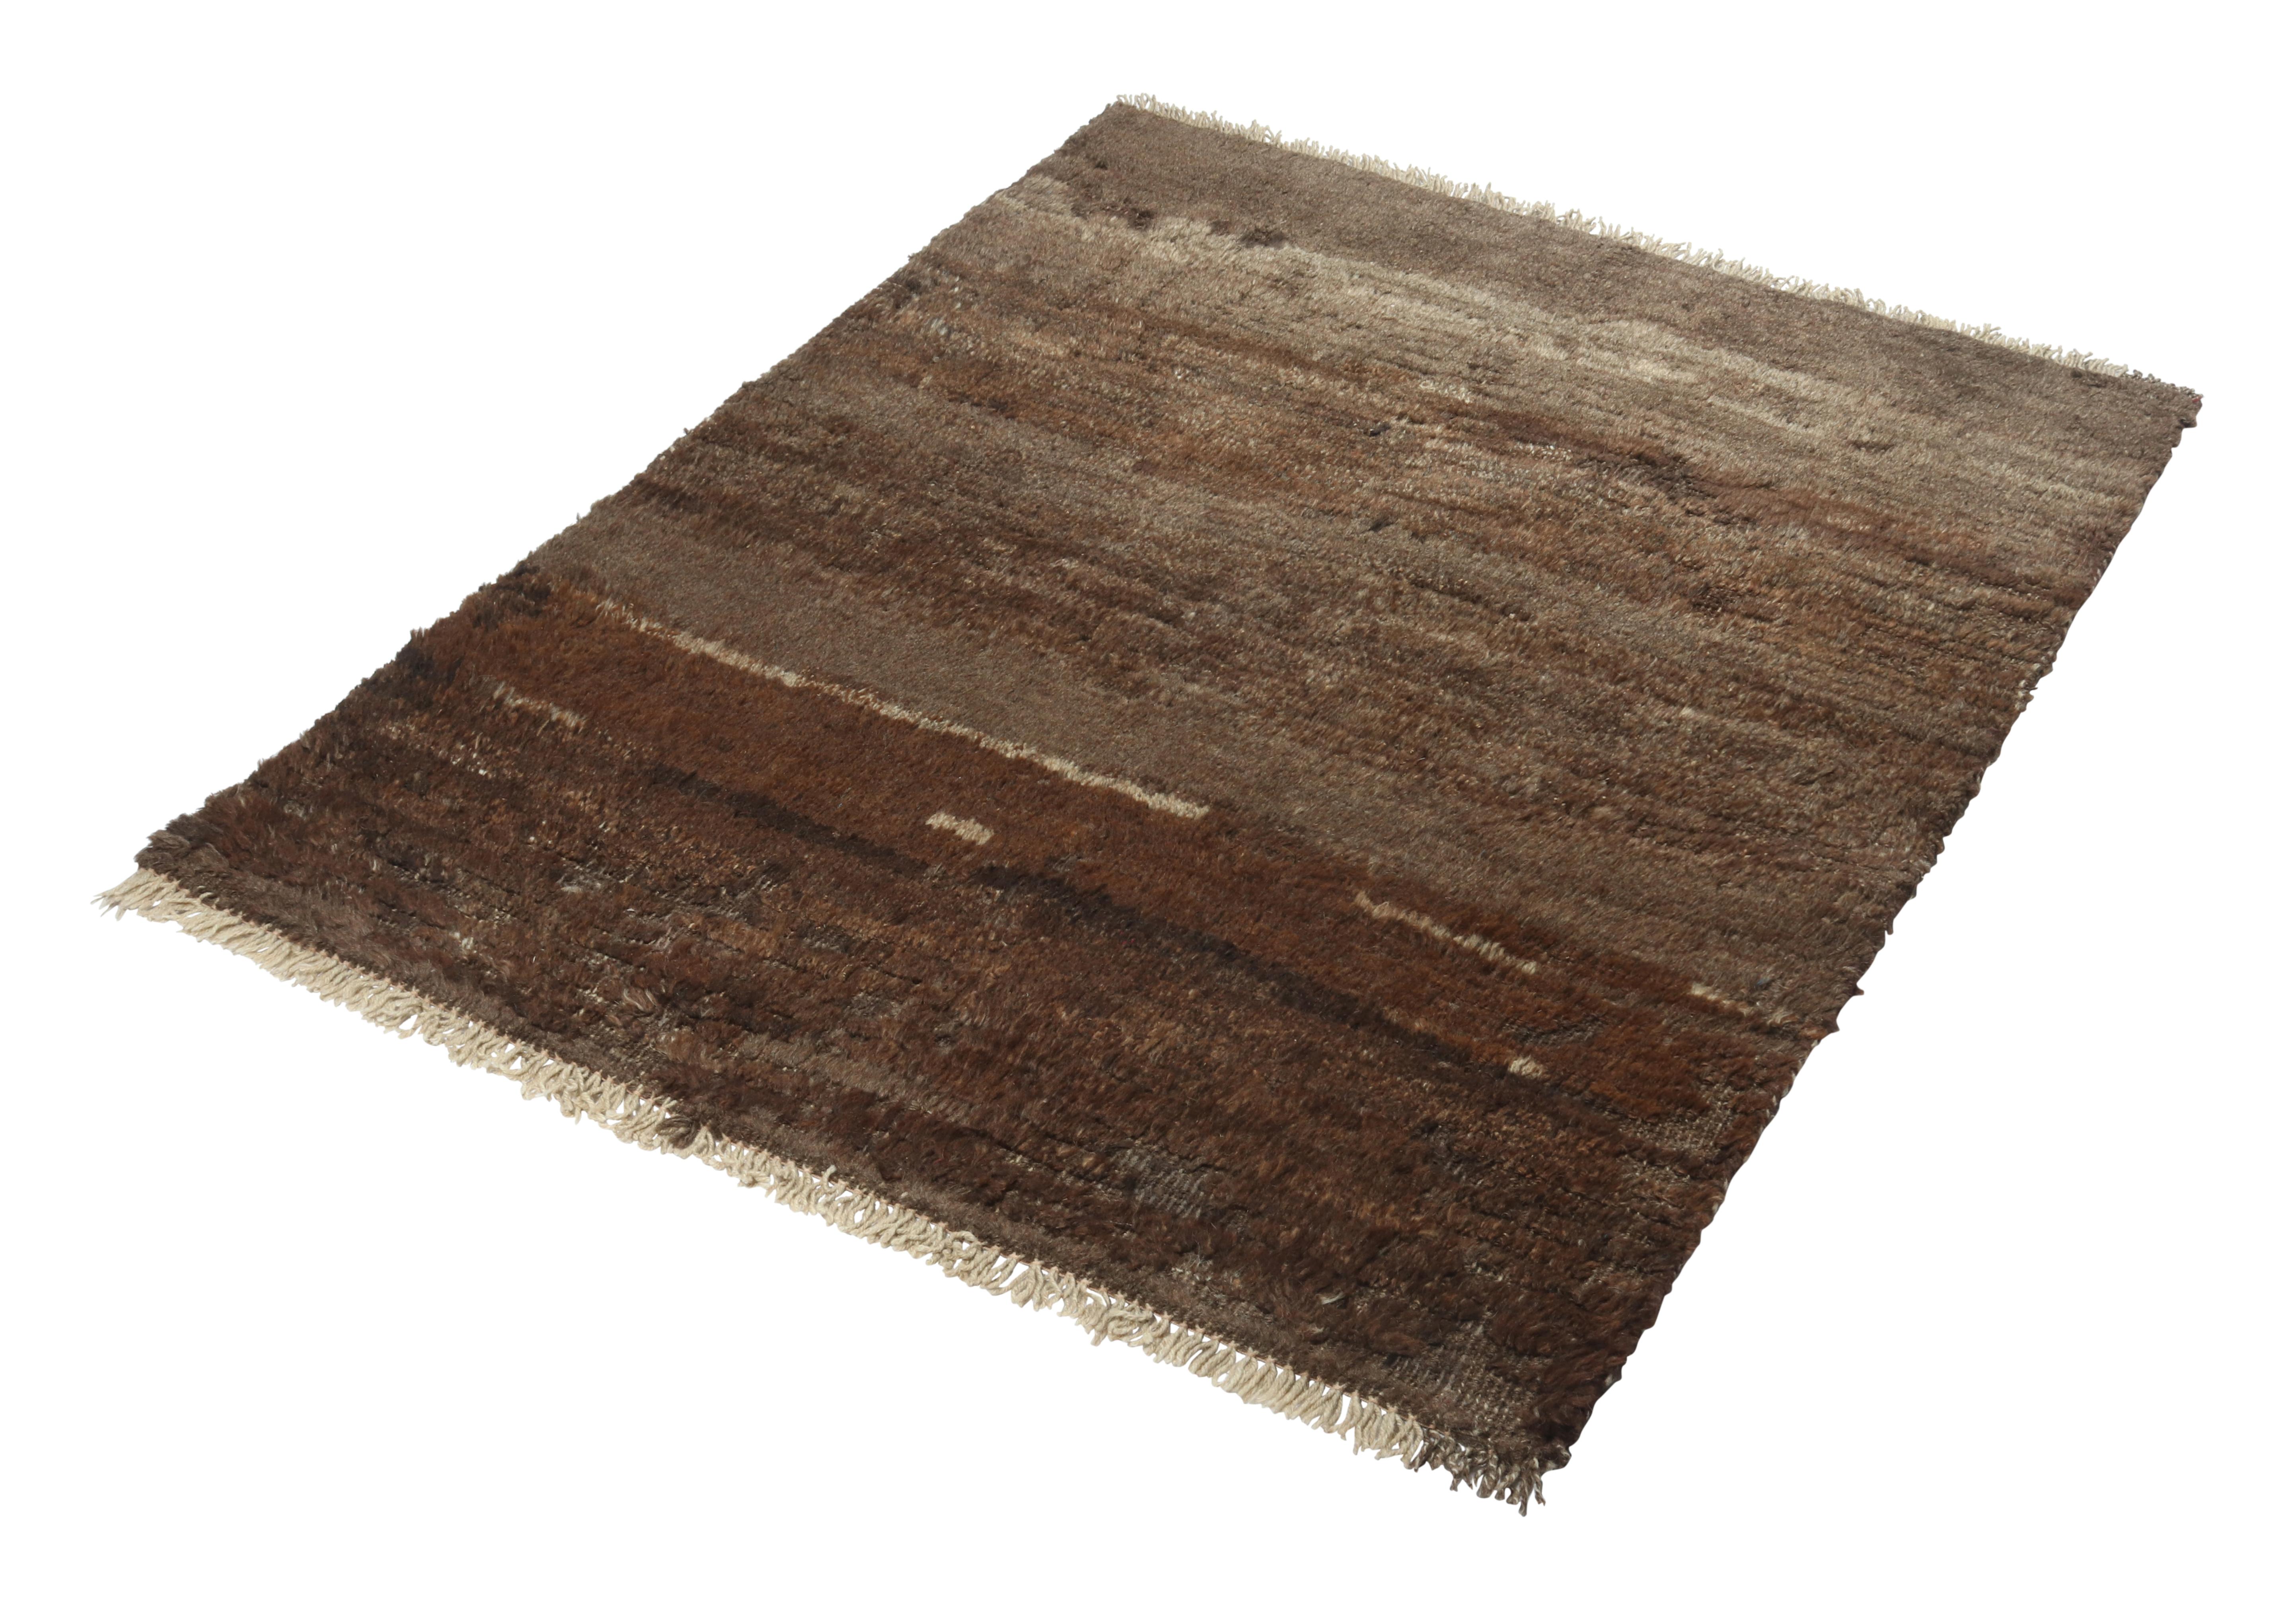 A vintage 3x4 Persian Gabbeh rug of rich entry to Rug & Kilim’s newest curation of rare tribal pieces. Hand-knotted in wool circa 1950-1960.

On the design: 

This mid-century piece enjoys a handsome play of deep brown and beige notes in a